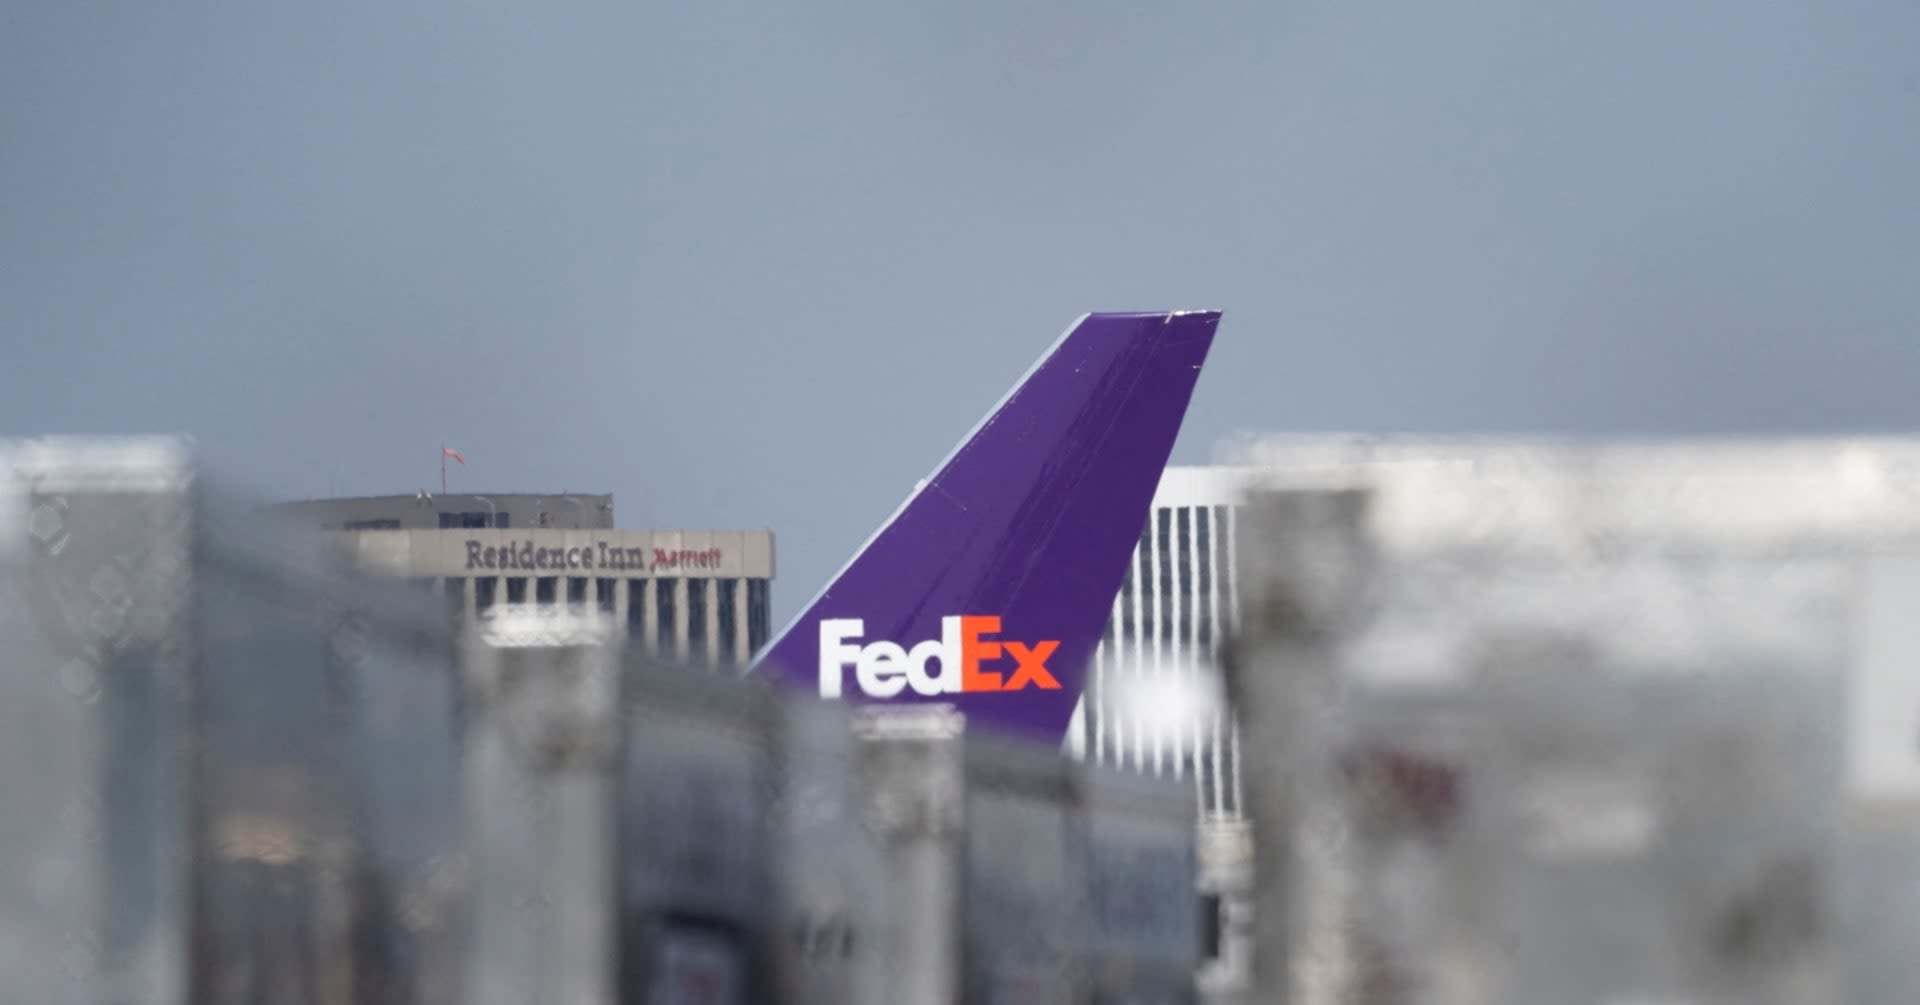 US to determine cause of Southwest, FedEx jetliners near-miss incident